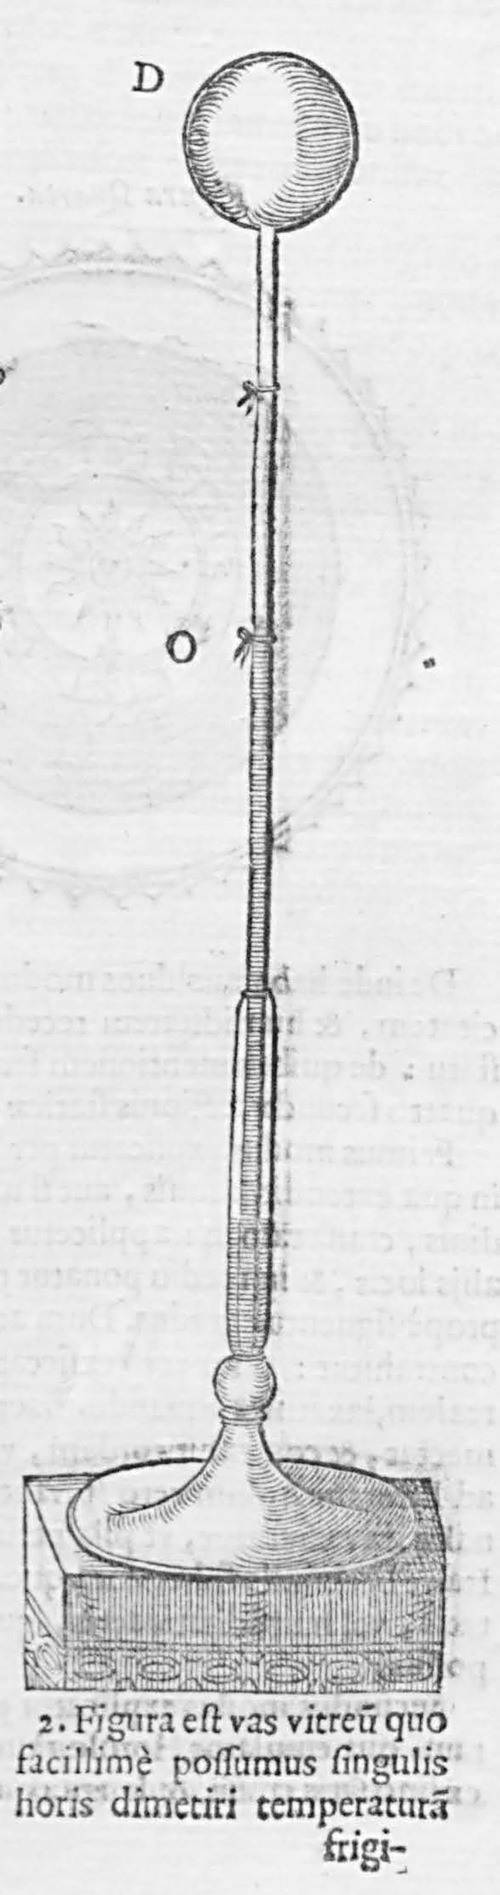 A cut-out of an illustration from a page in a book. It has a solid, raised platform, a circular base from which a tube rises long and tall with a ball at its end. A scale runs for a small height from the base along the pipe. A point O is marked equidistant from the scale's top and the ball.